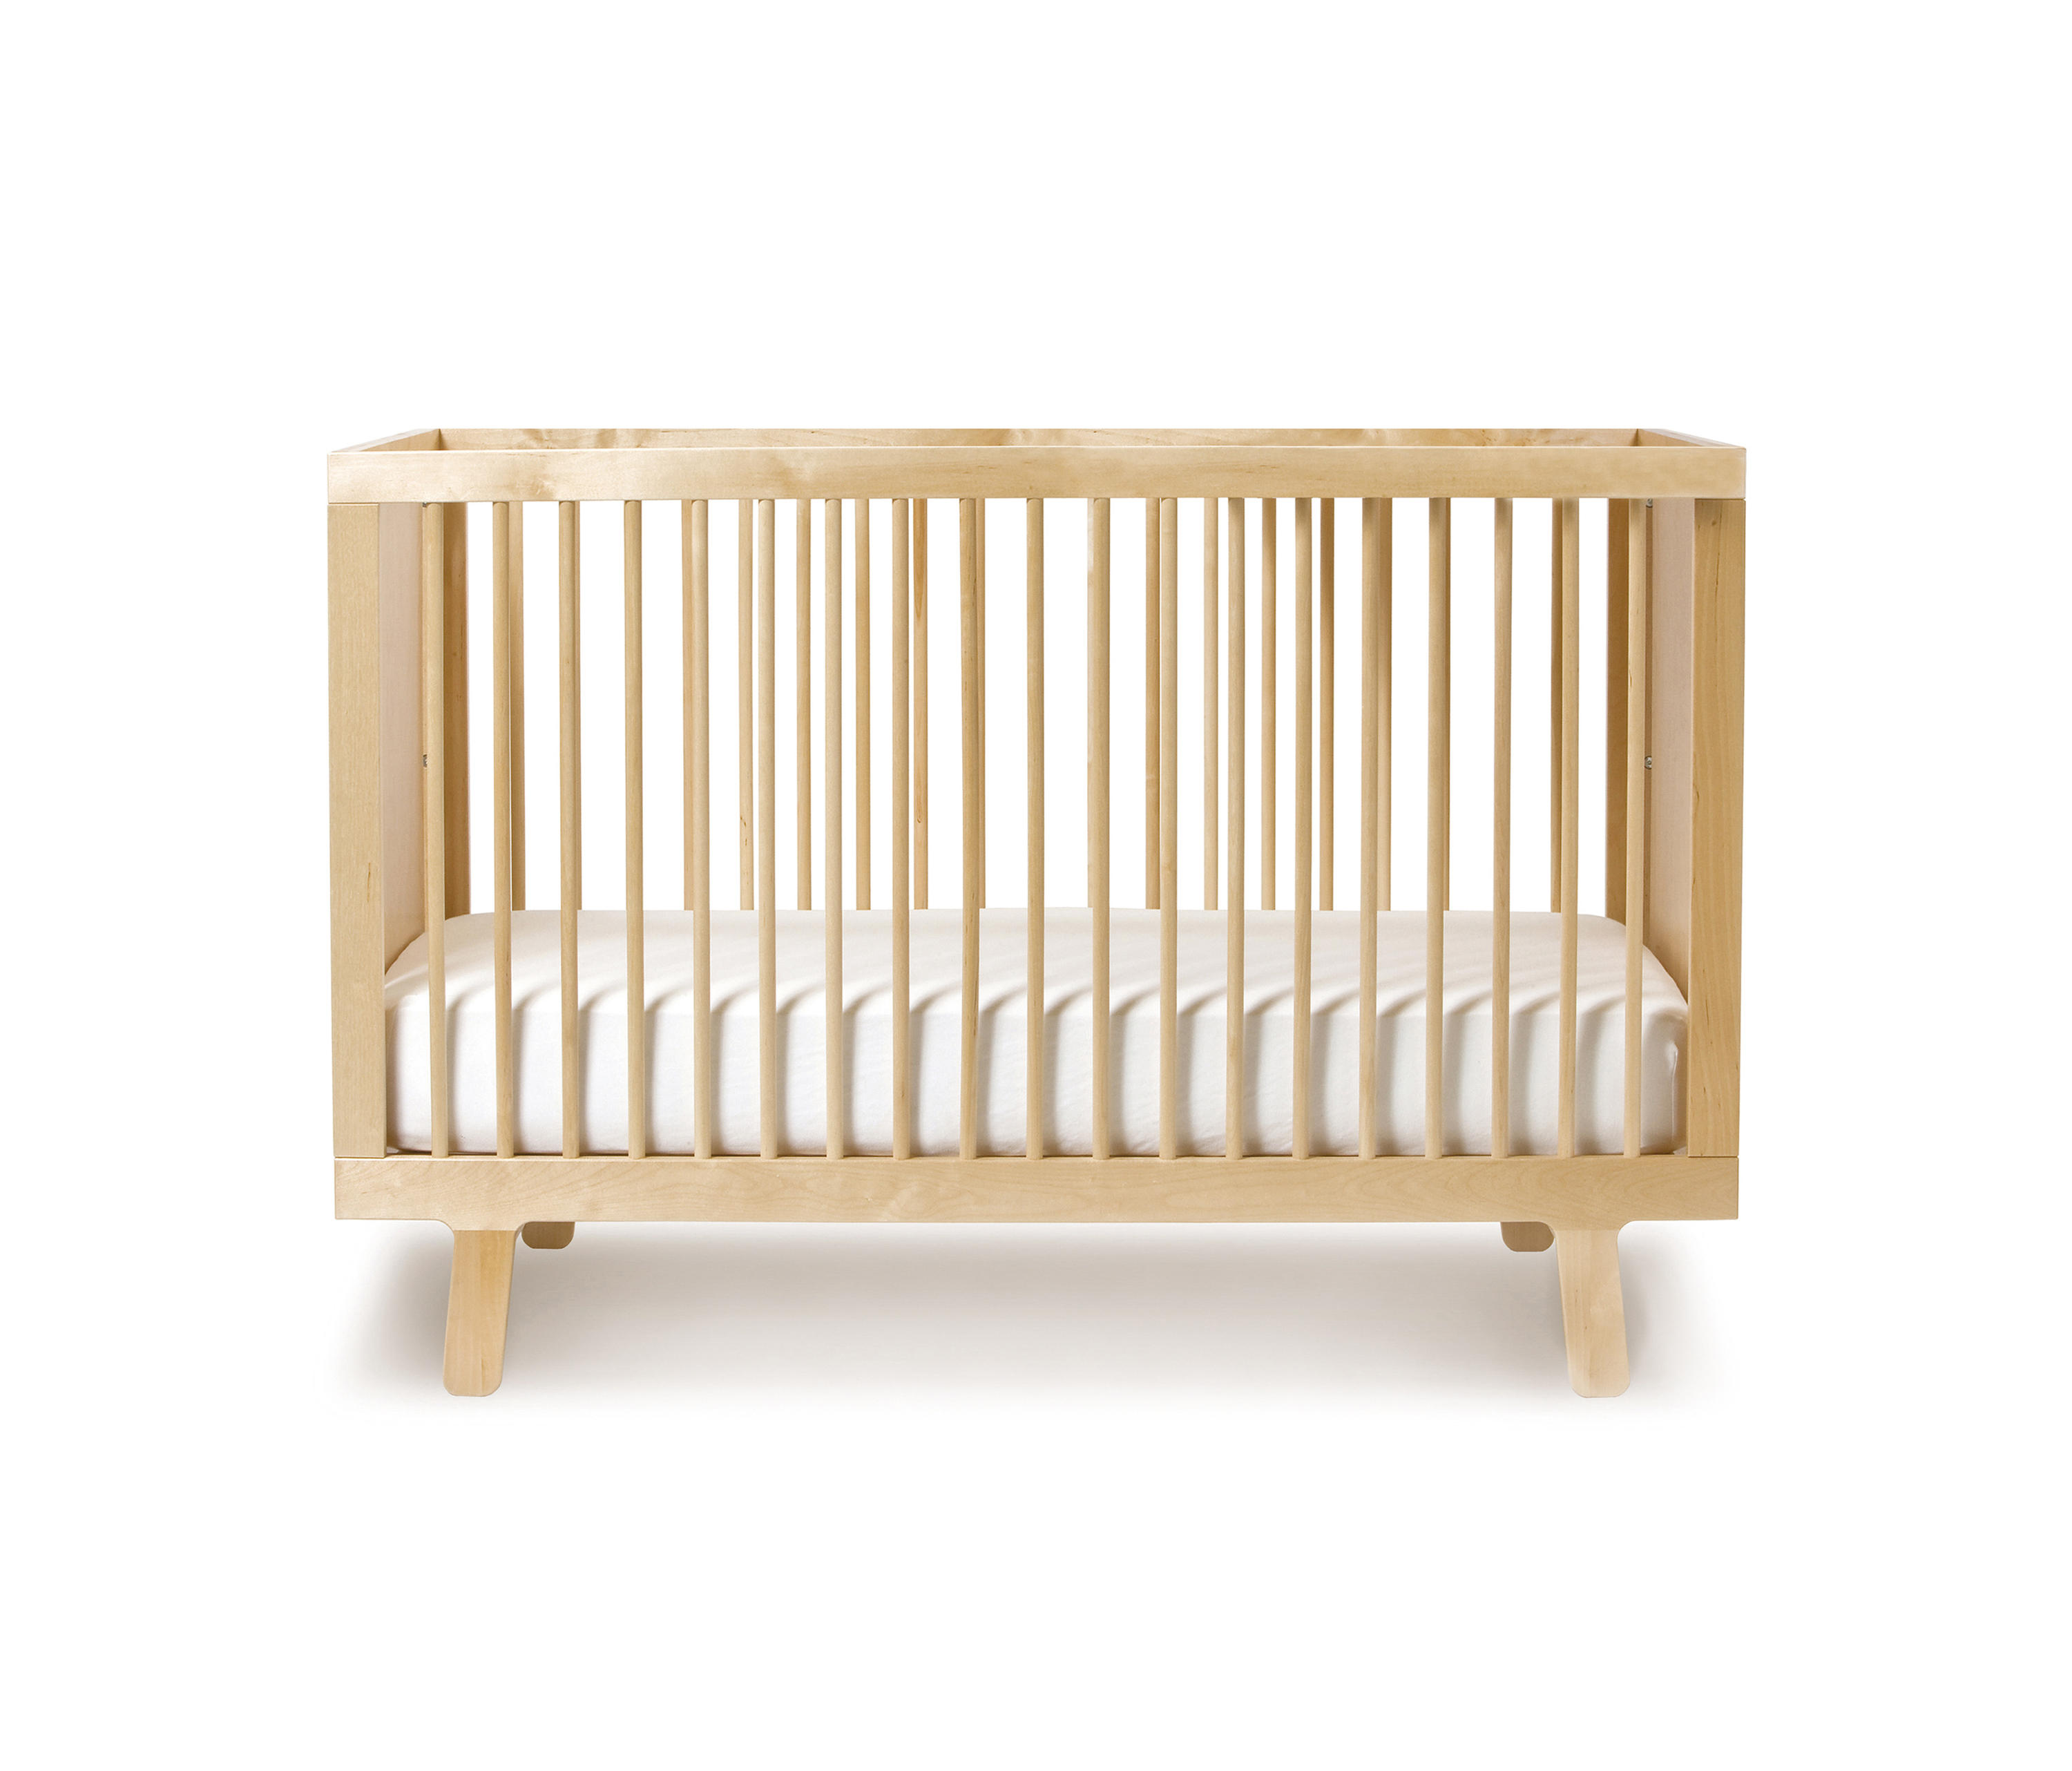 SPARROW CRIP - Kids beds from Oeuf - NY 